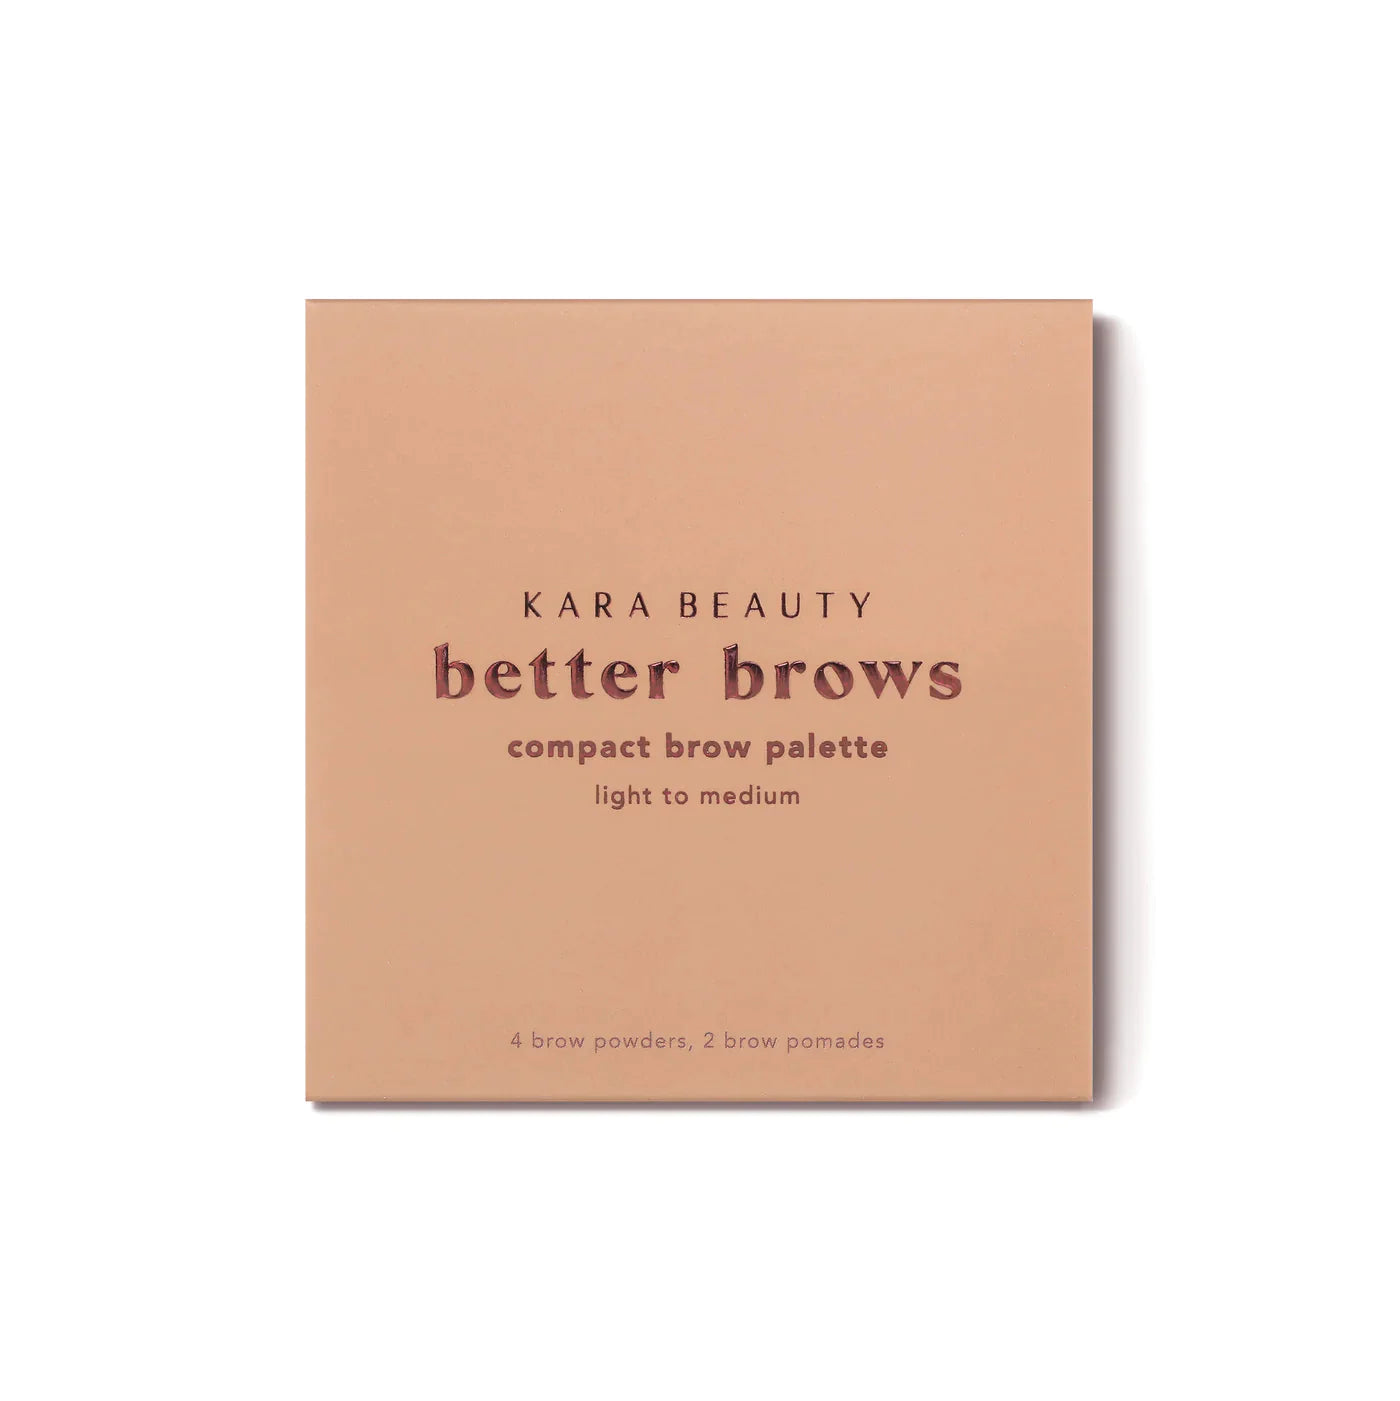 BETTER BROWS Mini Eyebrow Palette Find Your New Look Today!